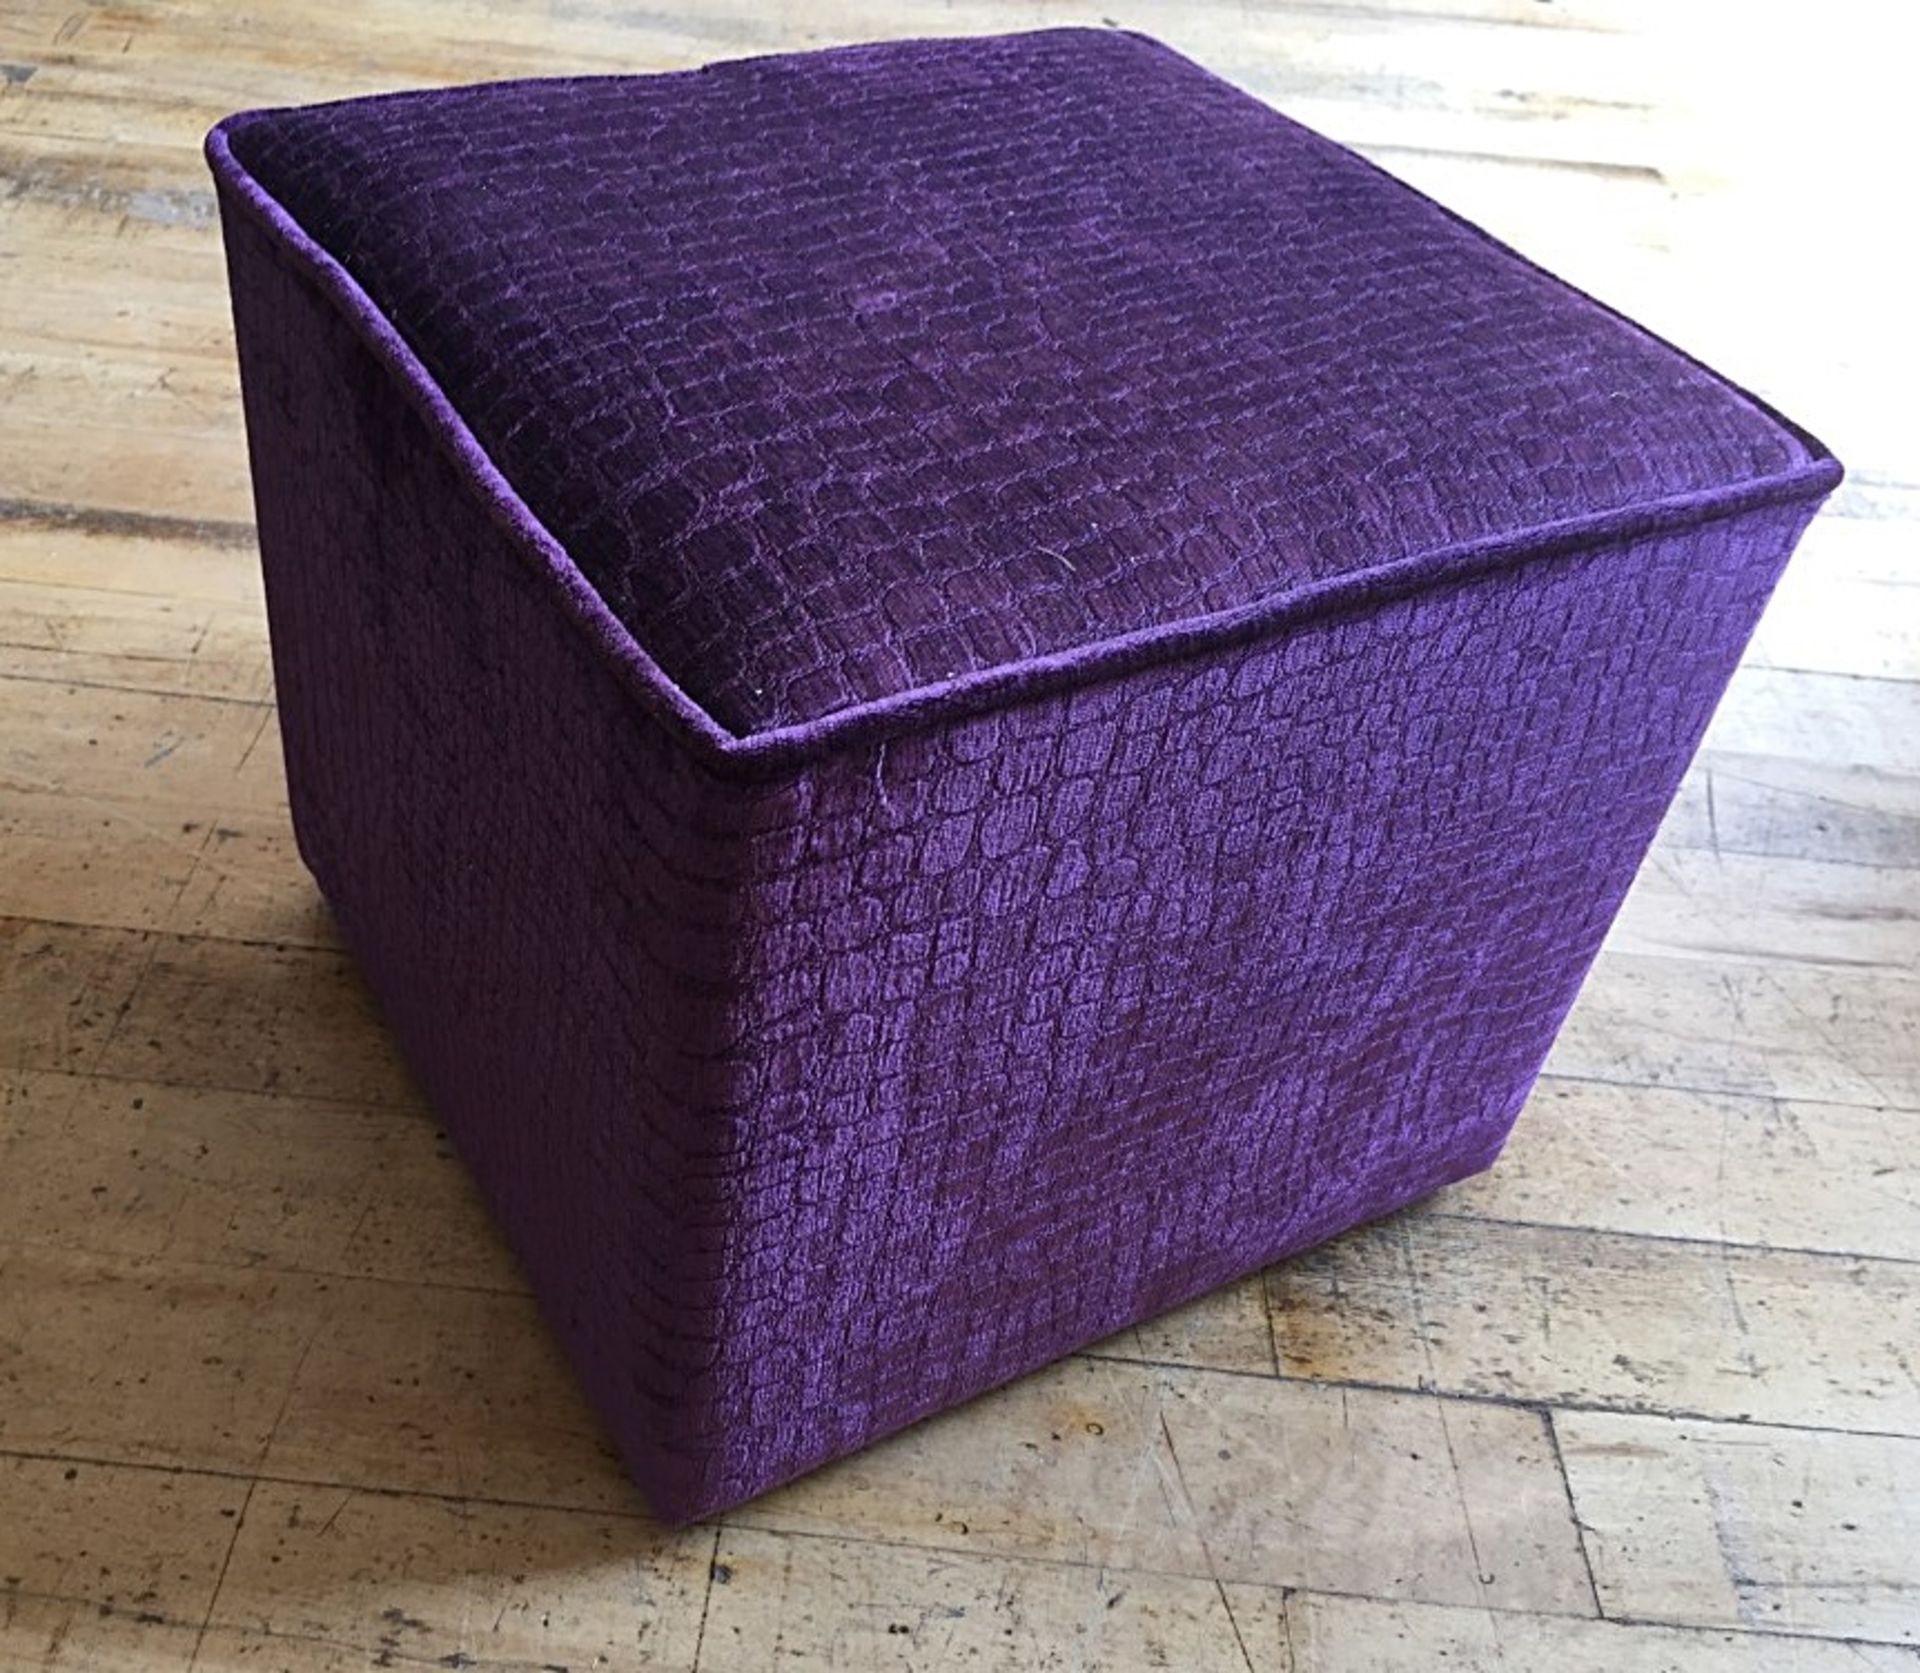 1 x Purple Alligator Chenille Print Cube Pouffe / Footstool - Dimensions: 37 x 37 x height 35cm- - Image 2 of 2